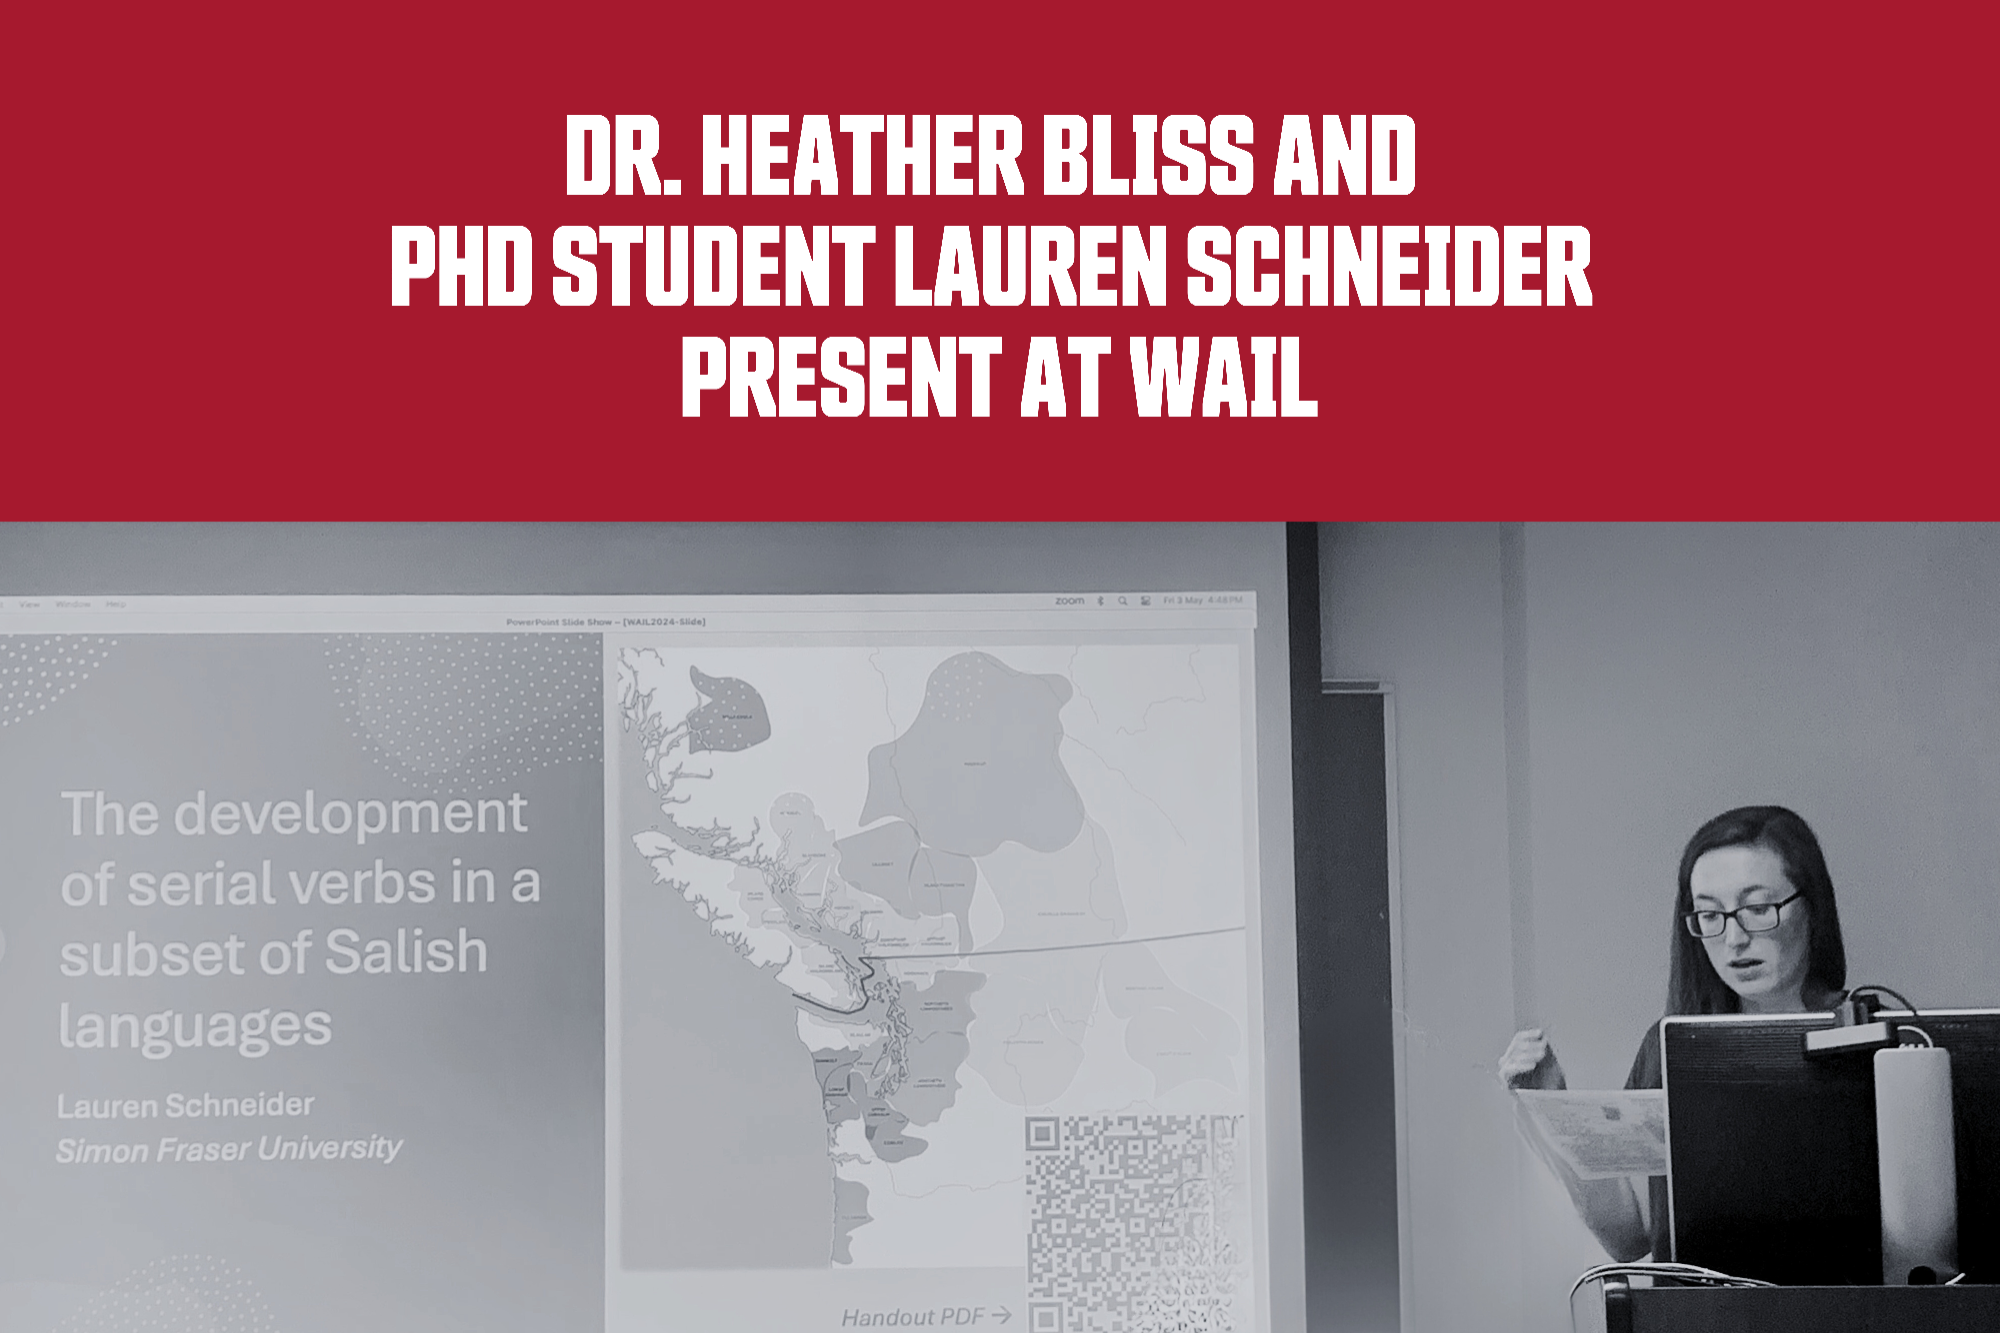 Dr. Heather Bliss and PhD student Lauren Schneider present at WAIL